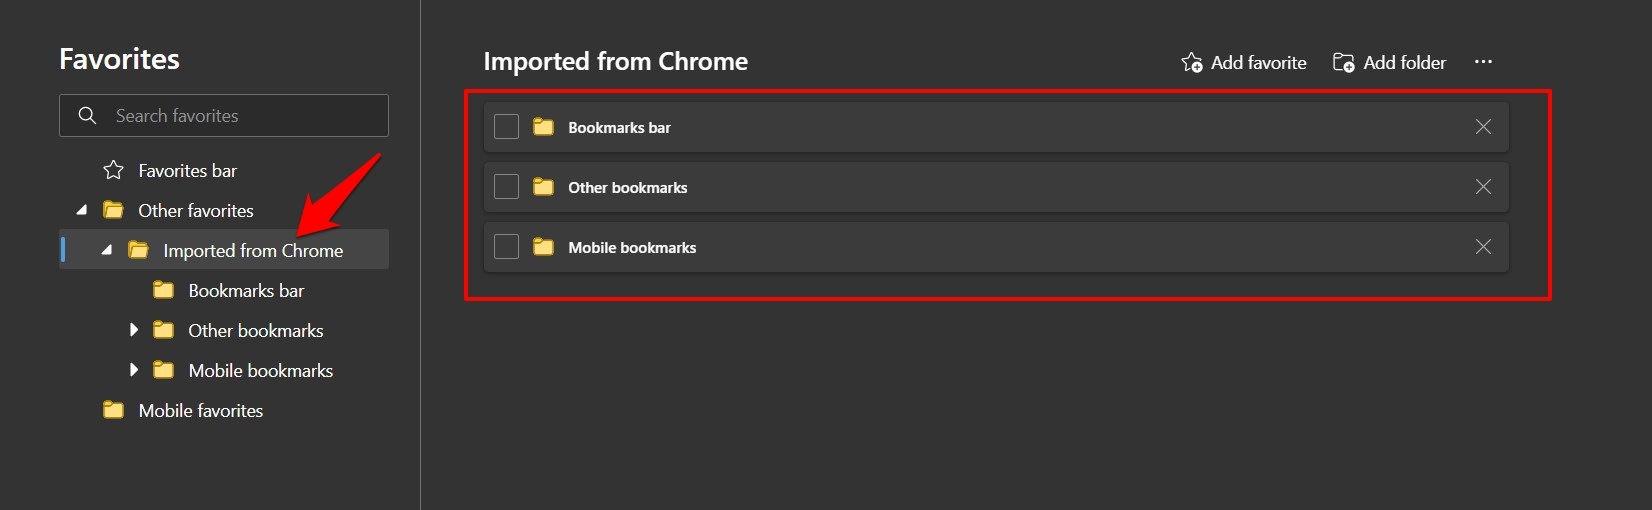 Imported from Chrome Bookmarks folder in Edge browser